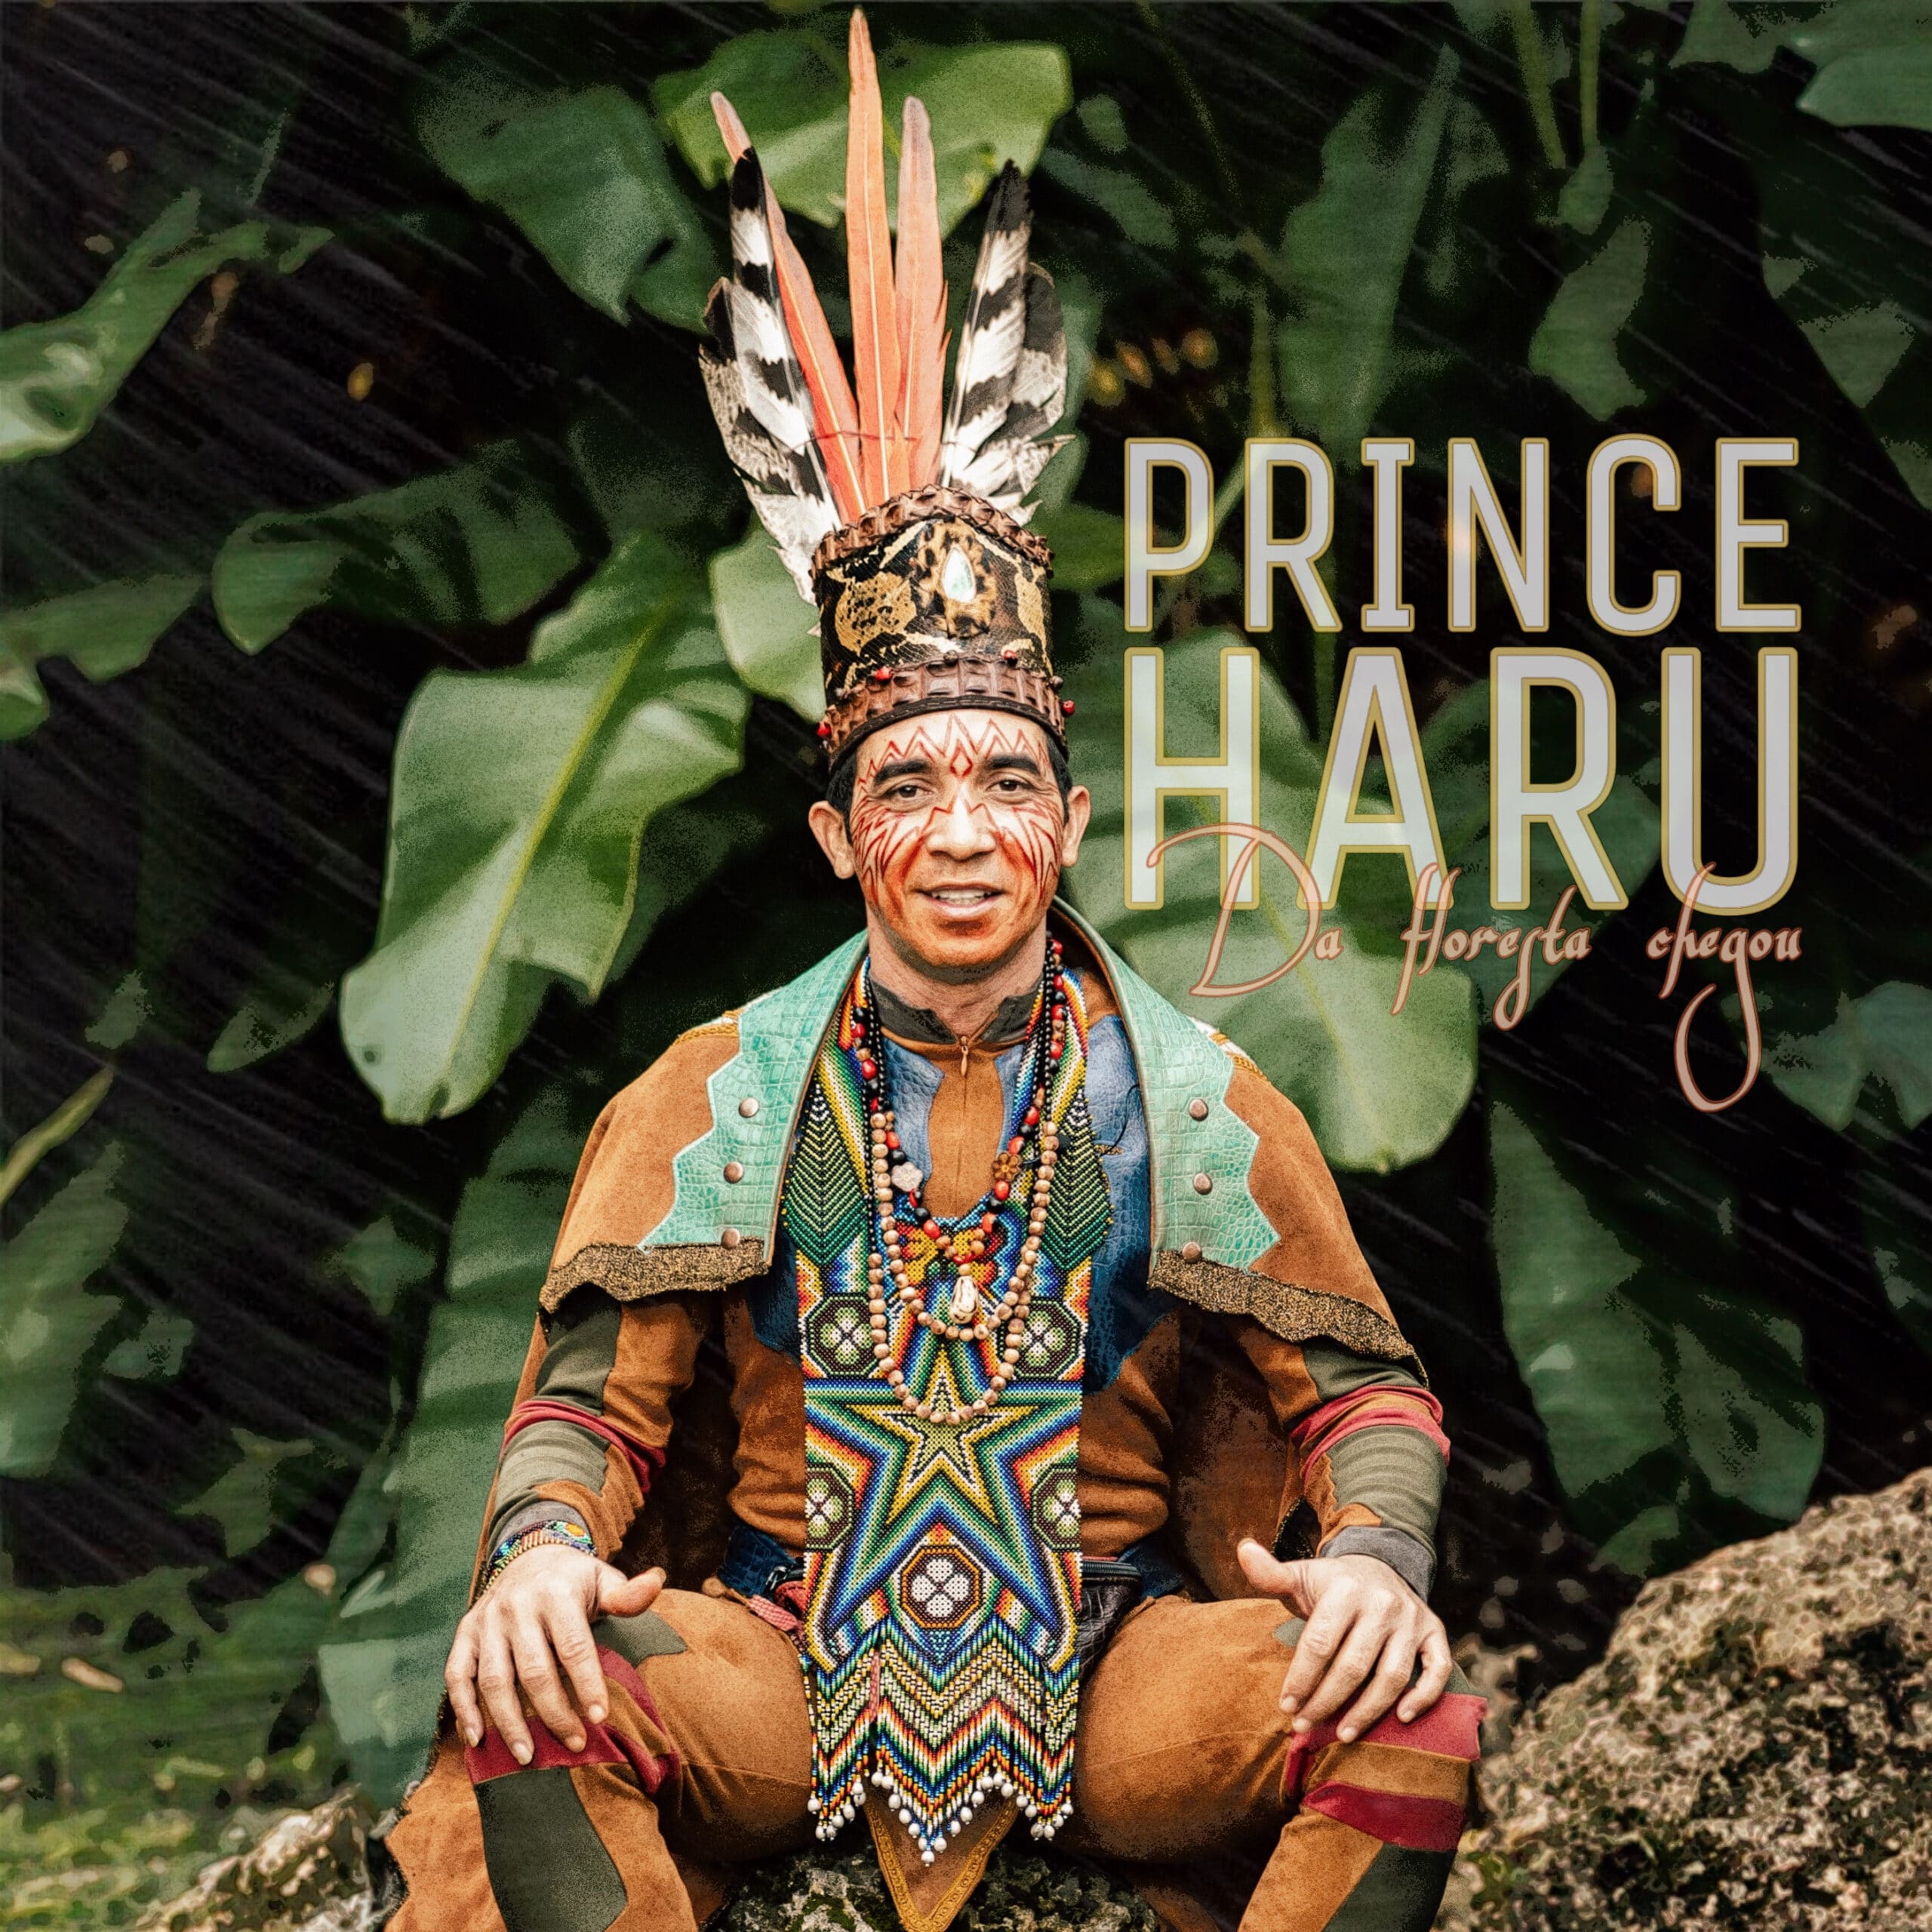 Prince Haru smiles in Kuntanawa beaded adornments and a feather crown